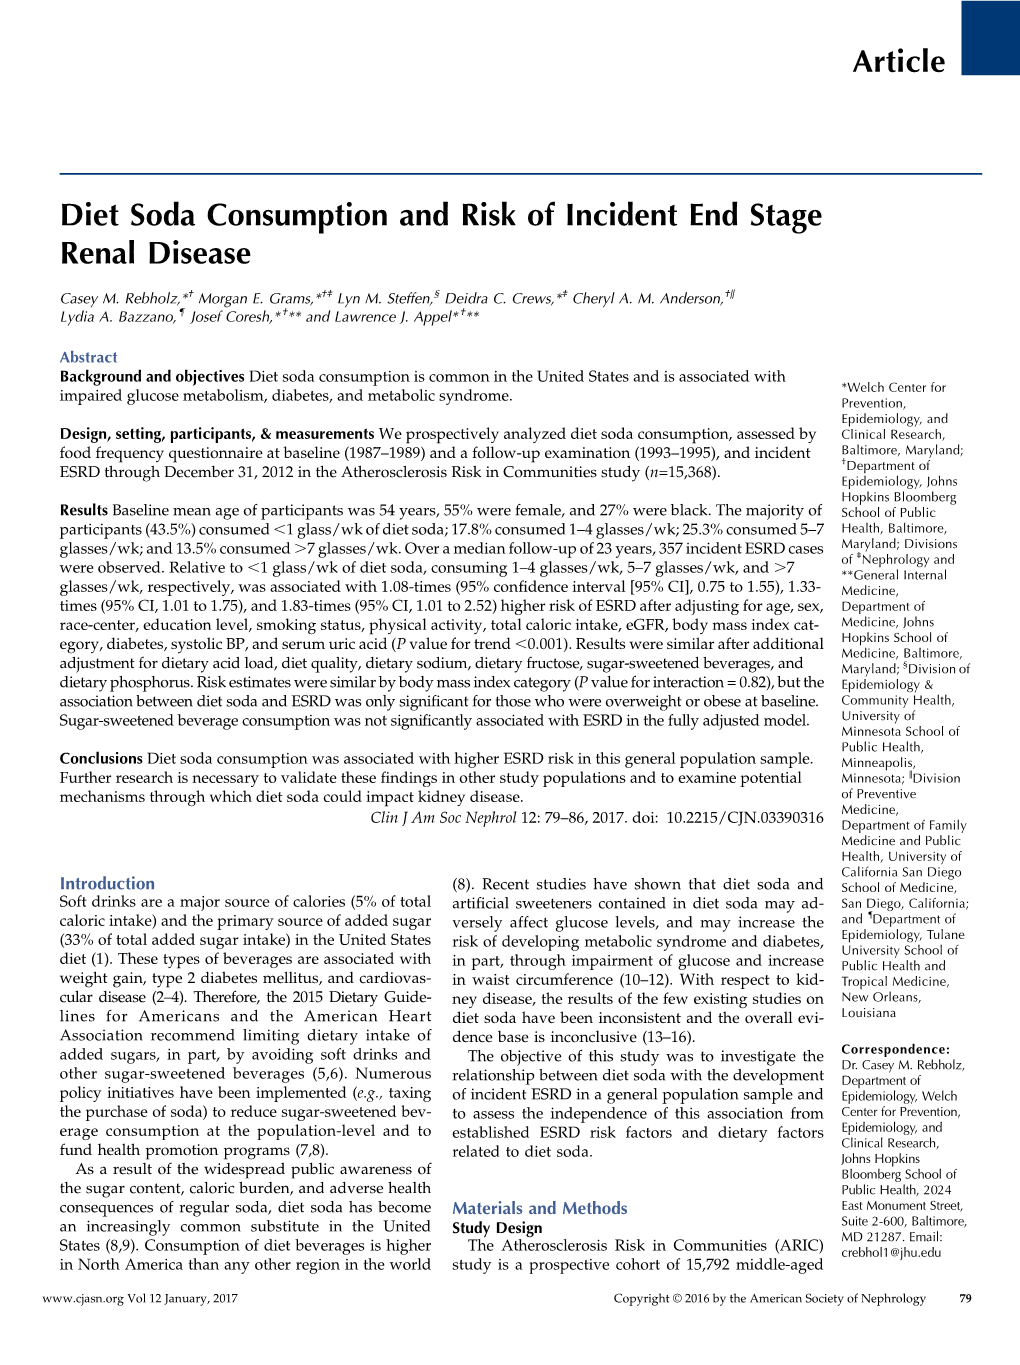 Diet Soda Consumption and Risk of Incident End Stage Renal Disease